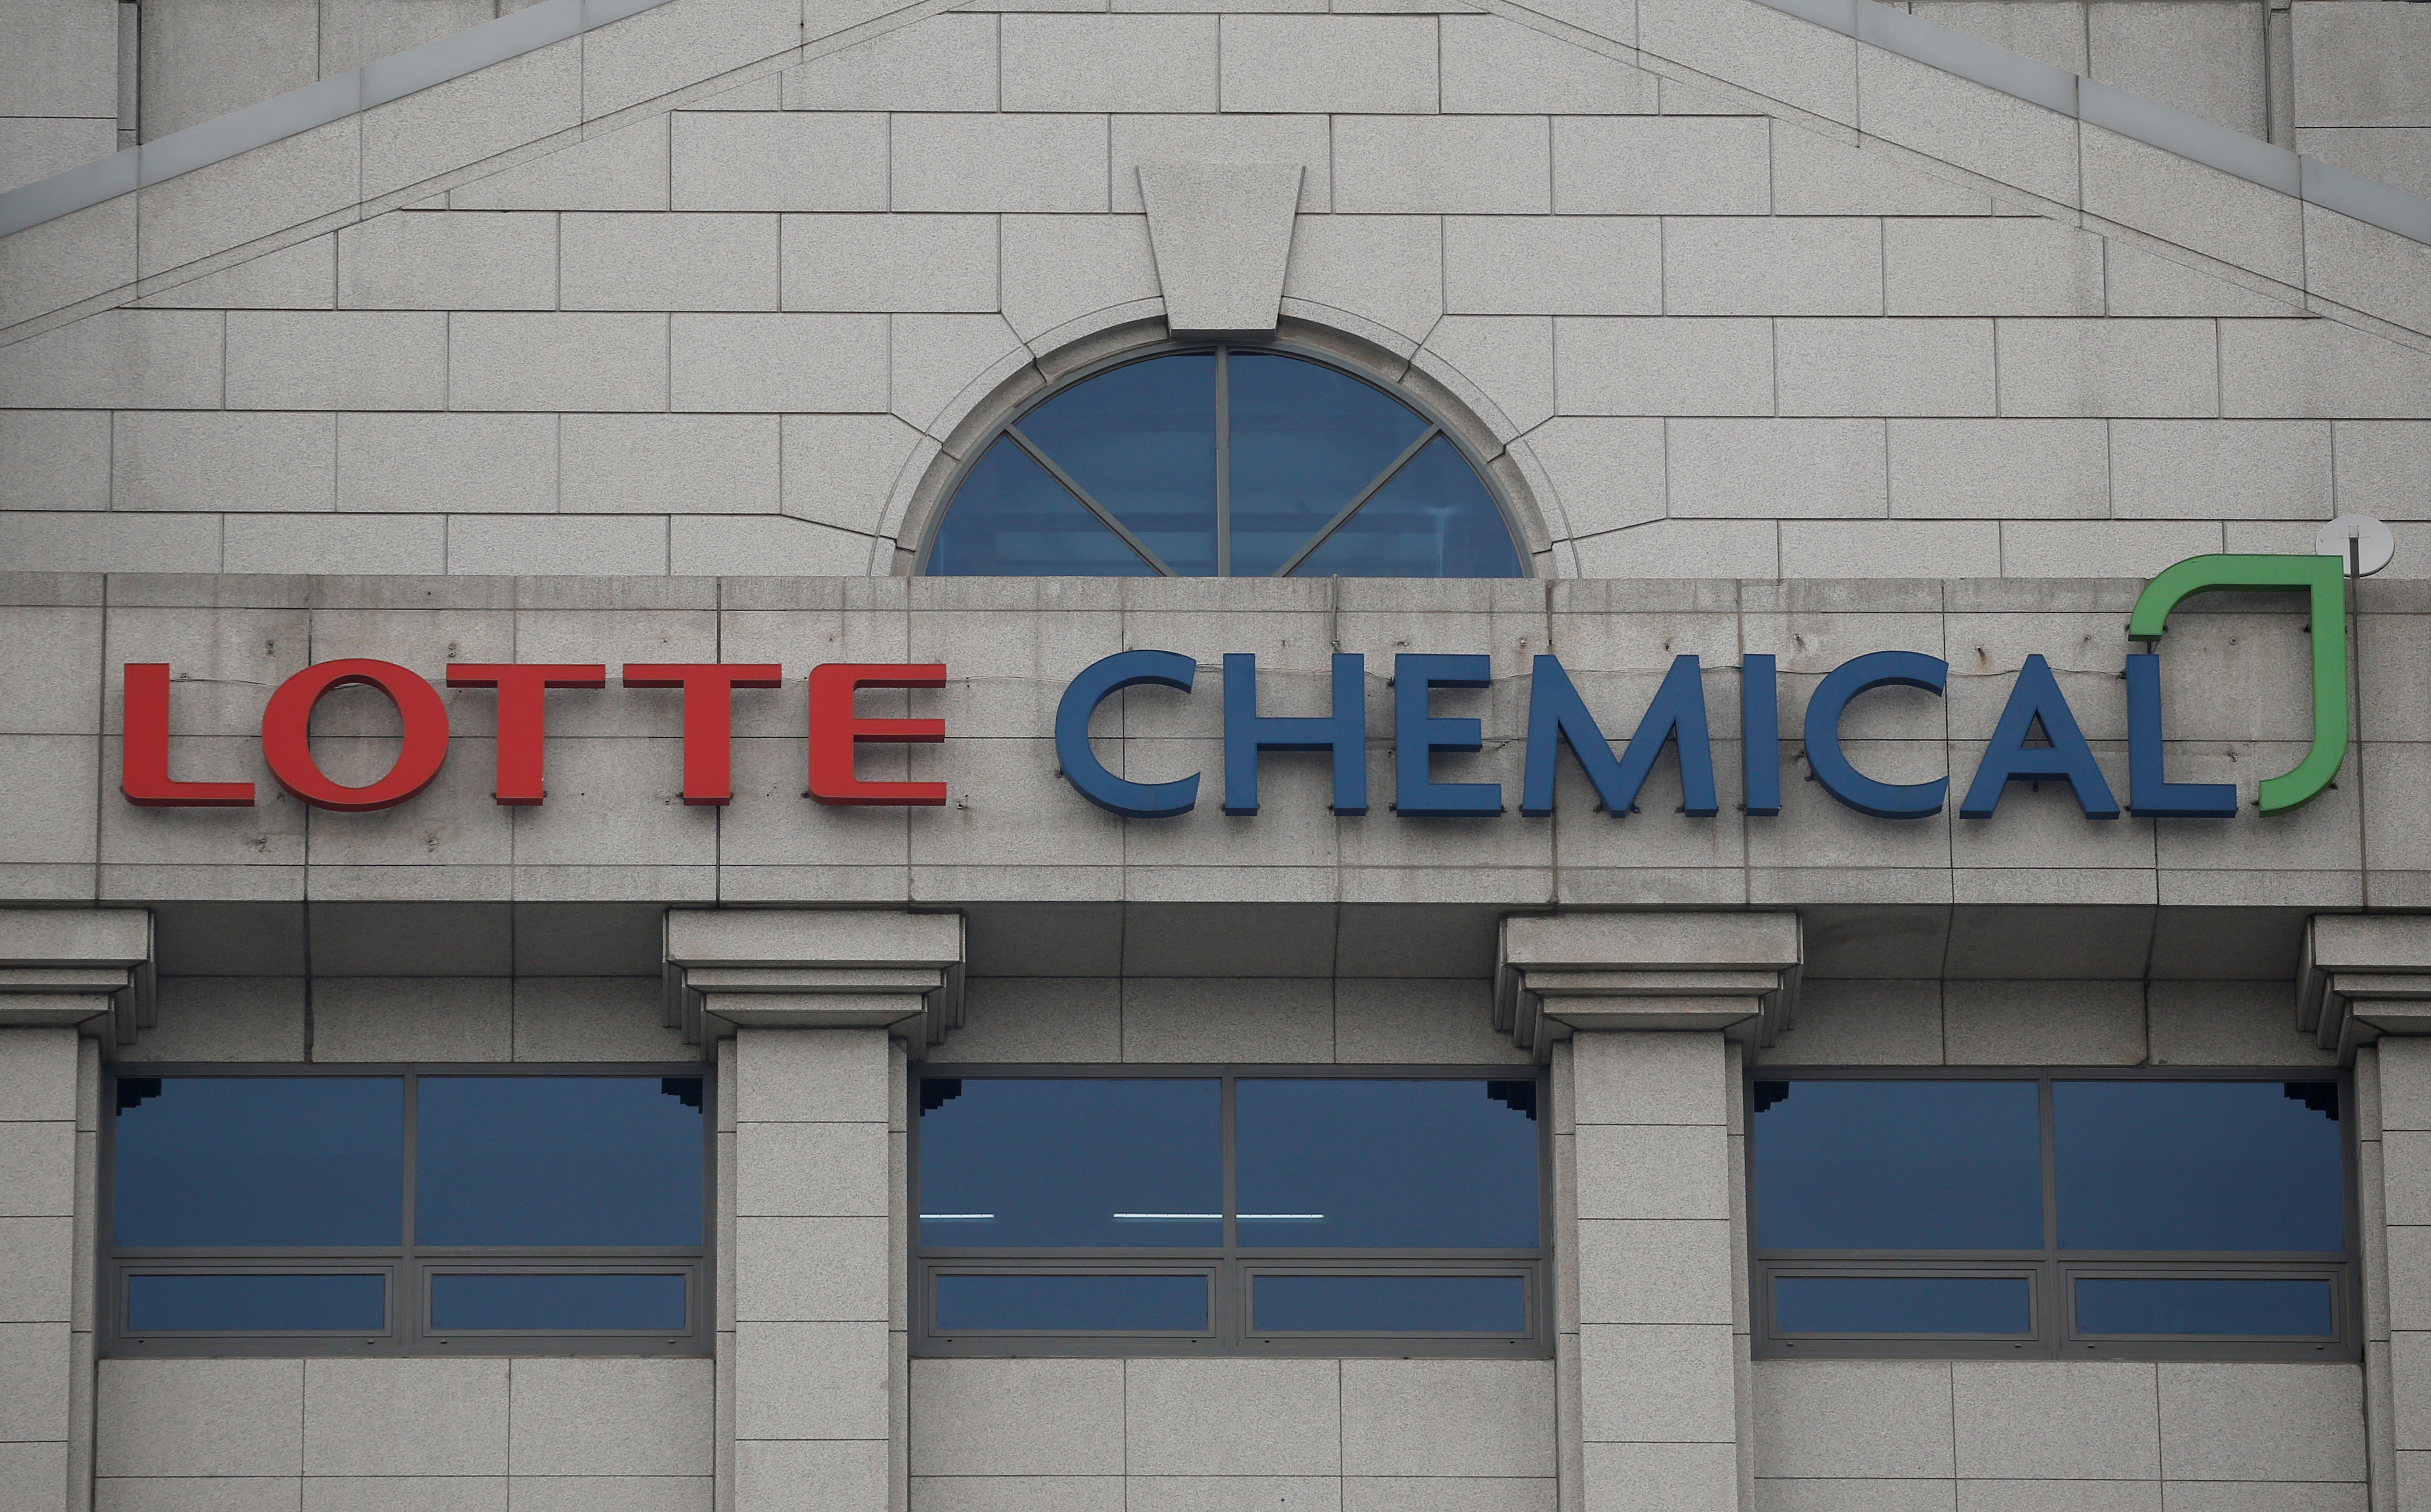 The logo of Lotte Chemical is seen at its building in Seoul